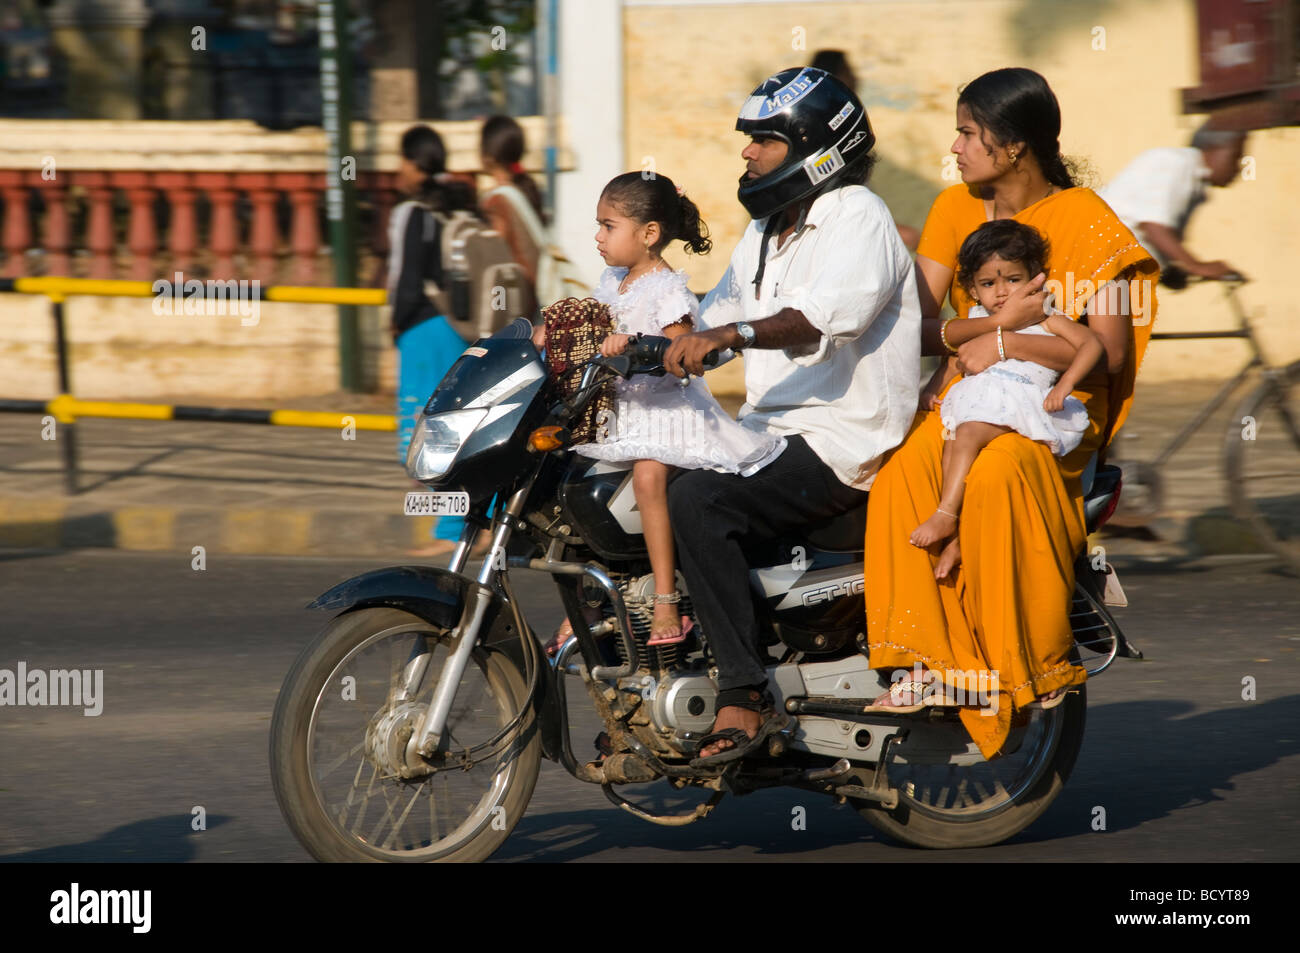 An Indian family on a motorbike in India Ratan Tata has said seeing whole famiies on one bike was his inspiration for the Nano Stock Photo